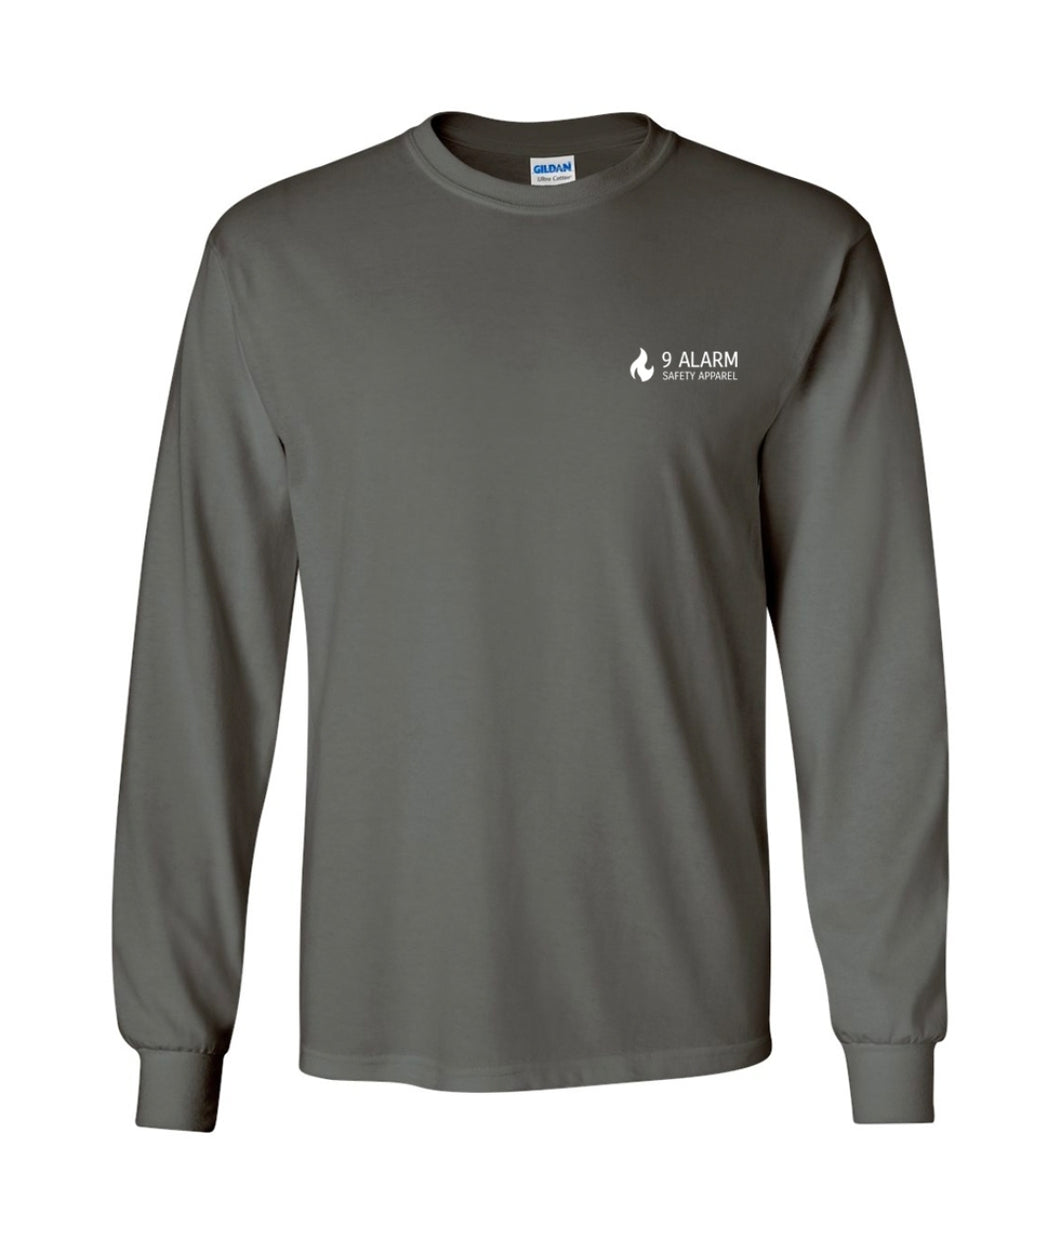 Long Sleeve Support Shirt - $20 w/code: SUPPORT20